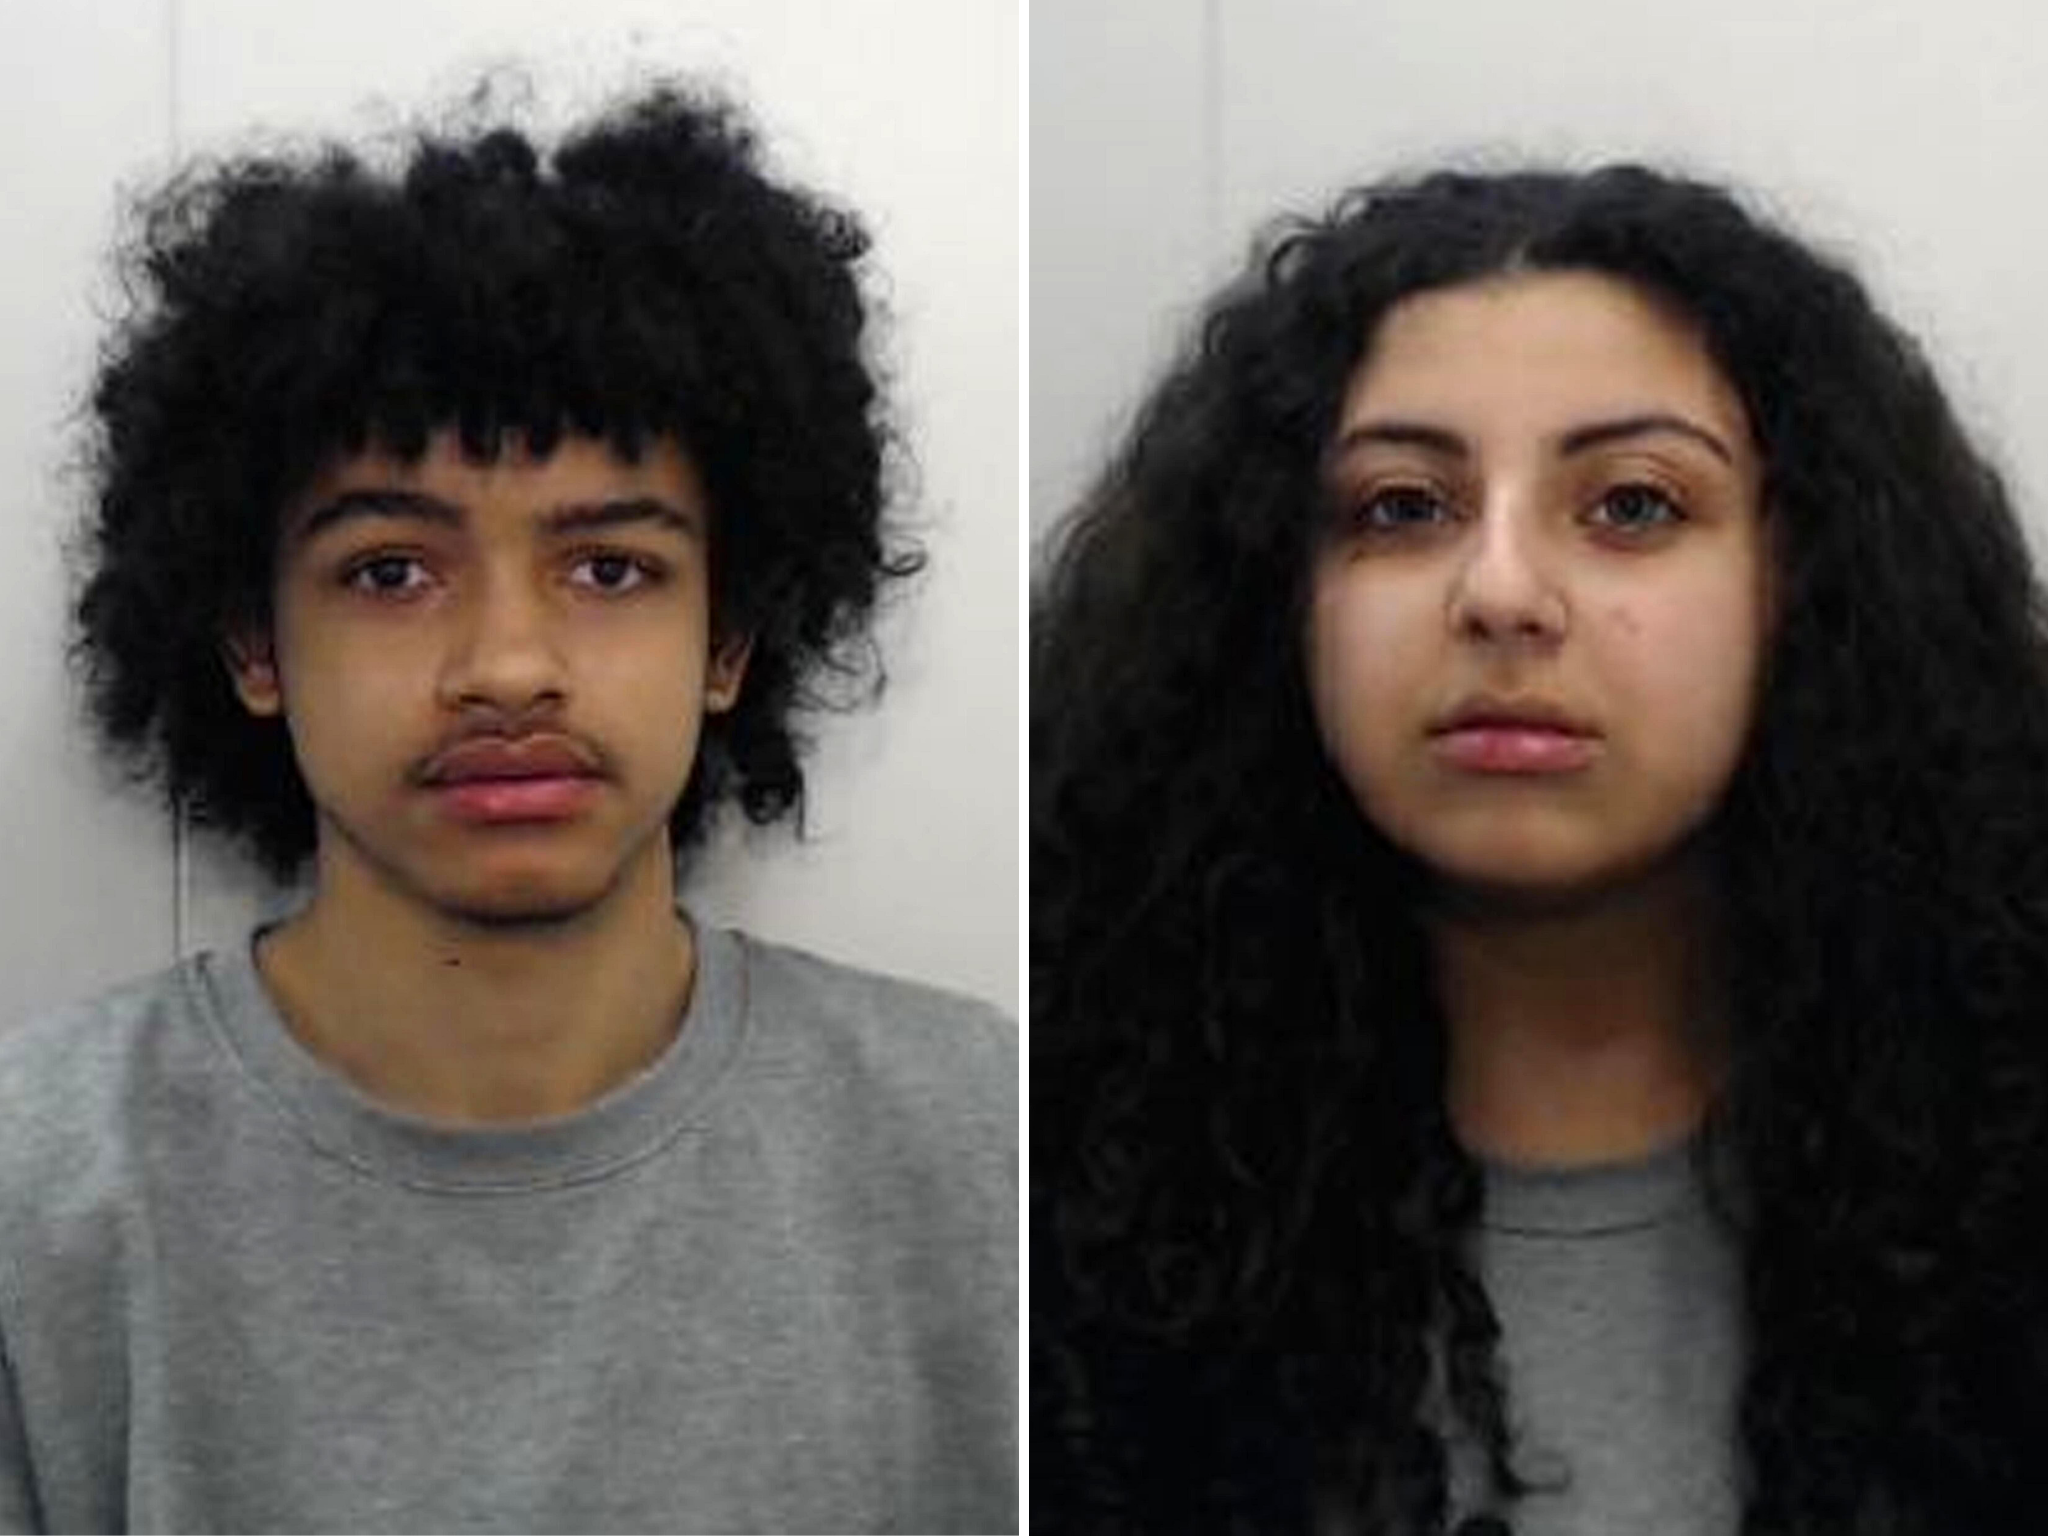 Rhett Carty-Shaw (left) and Sarah Mohamed, both 17, have been jailed for 16 years for plotting to murder a 16-year-old girl in Openshaw, Greater Manchester, 20 December, 2019.